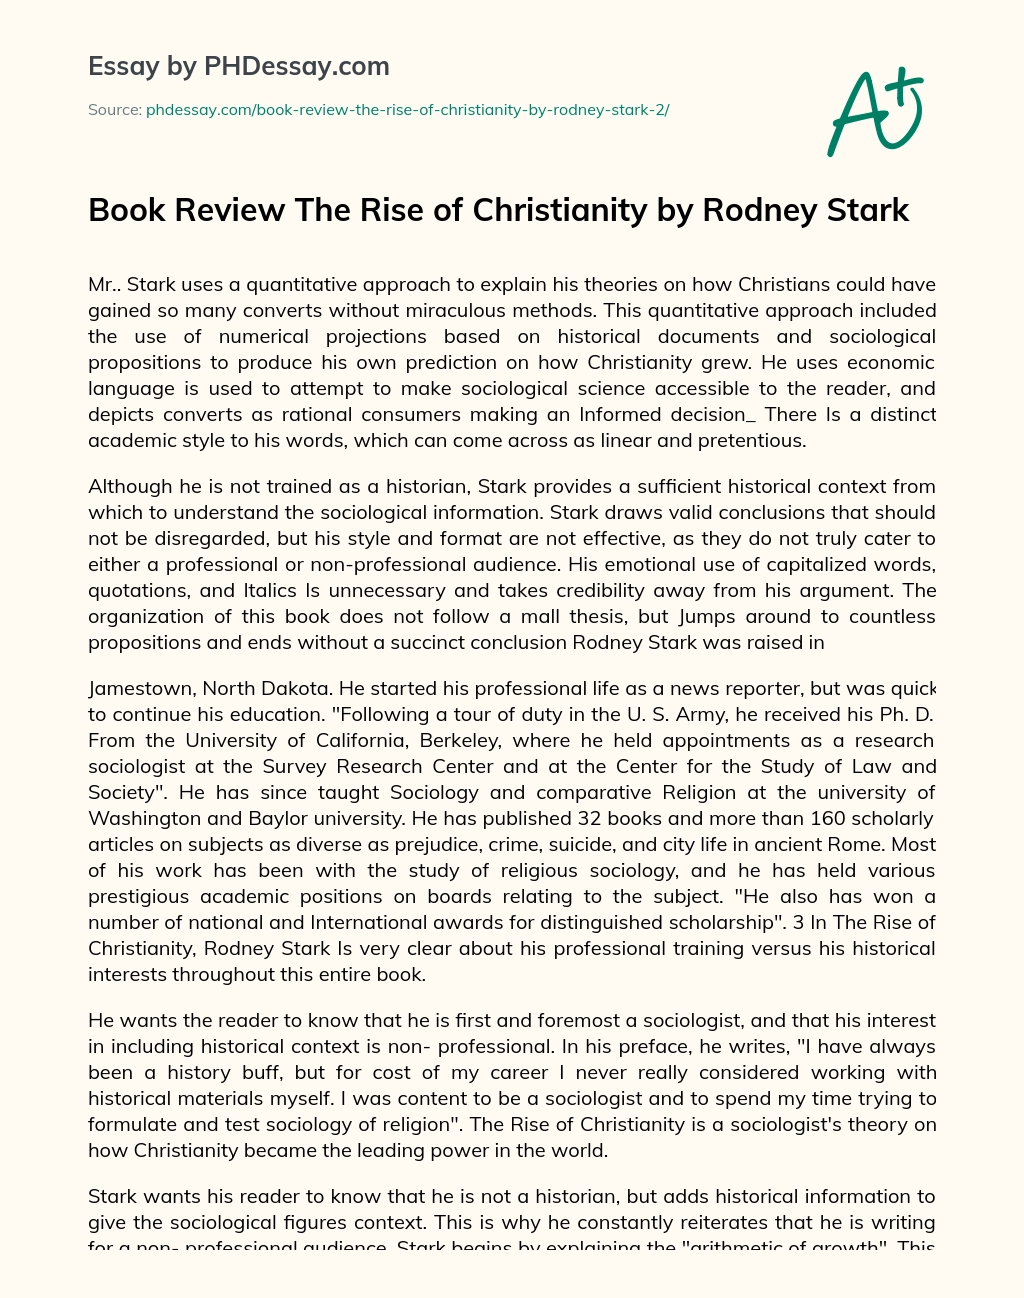 Book Review The Rise of Christianity by Rodney Stark essay